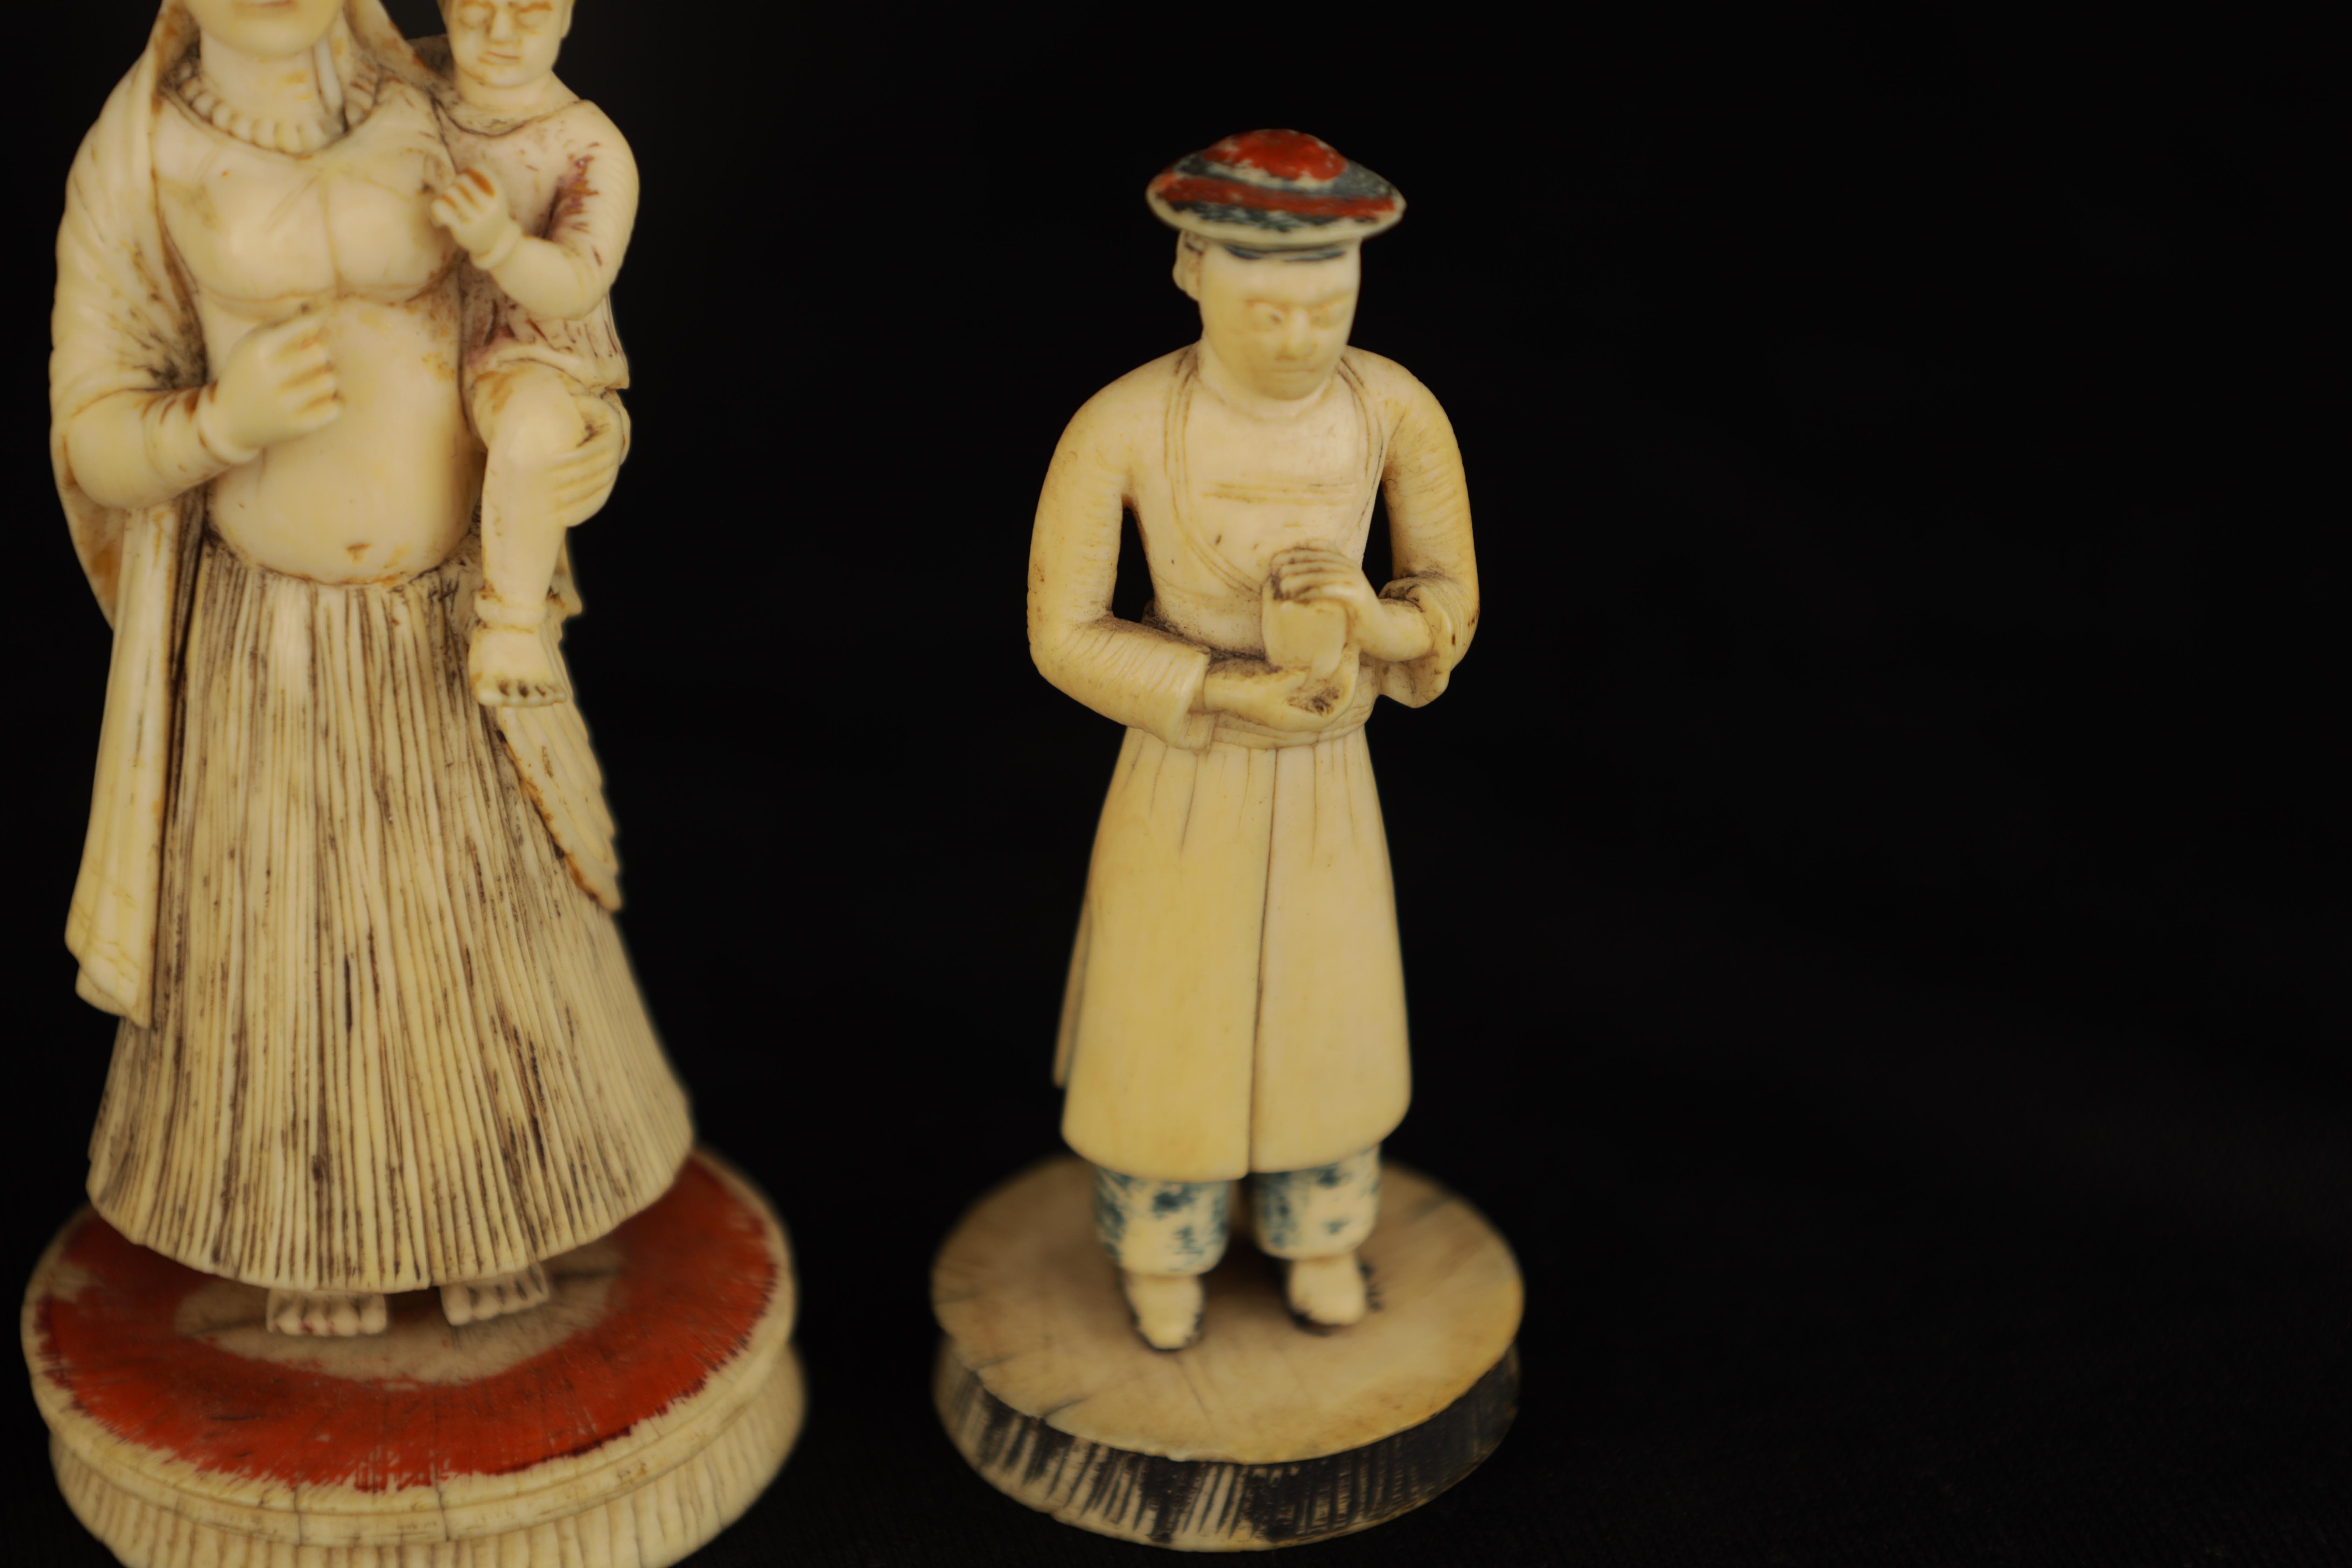 FIVE 19TH CENTURY INDIAN IVORY CHESS PIECES depicting finely carved figures in ceremonial dress - Image 4 of 7